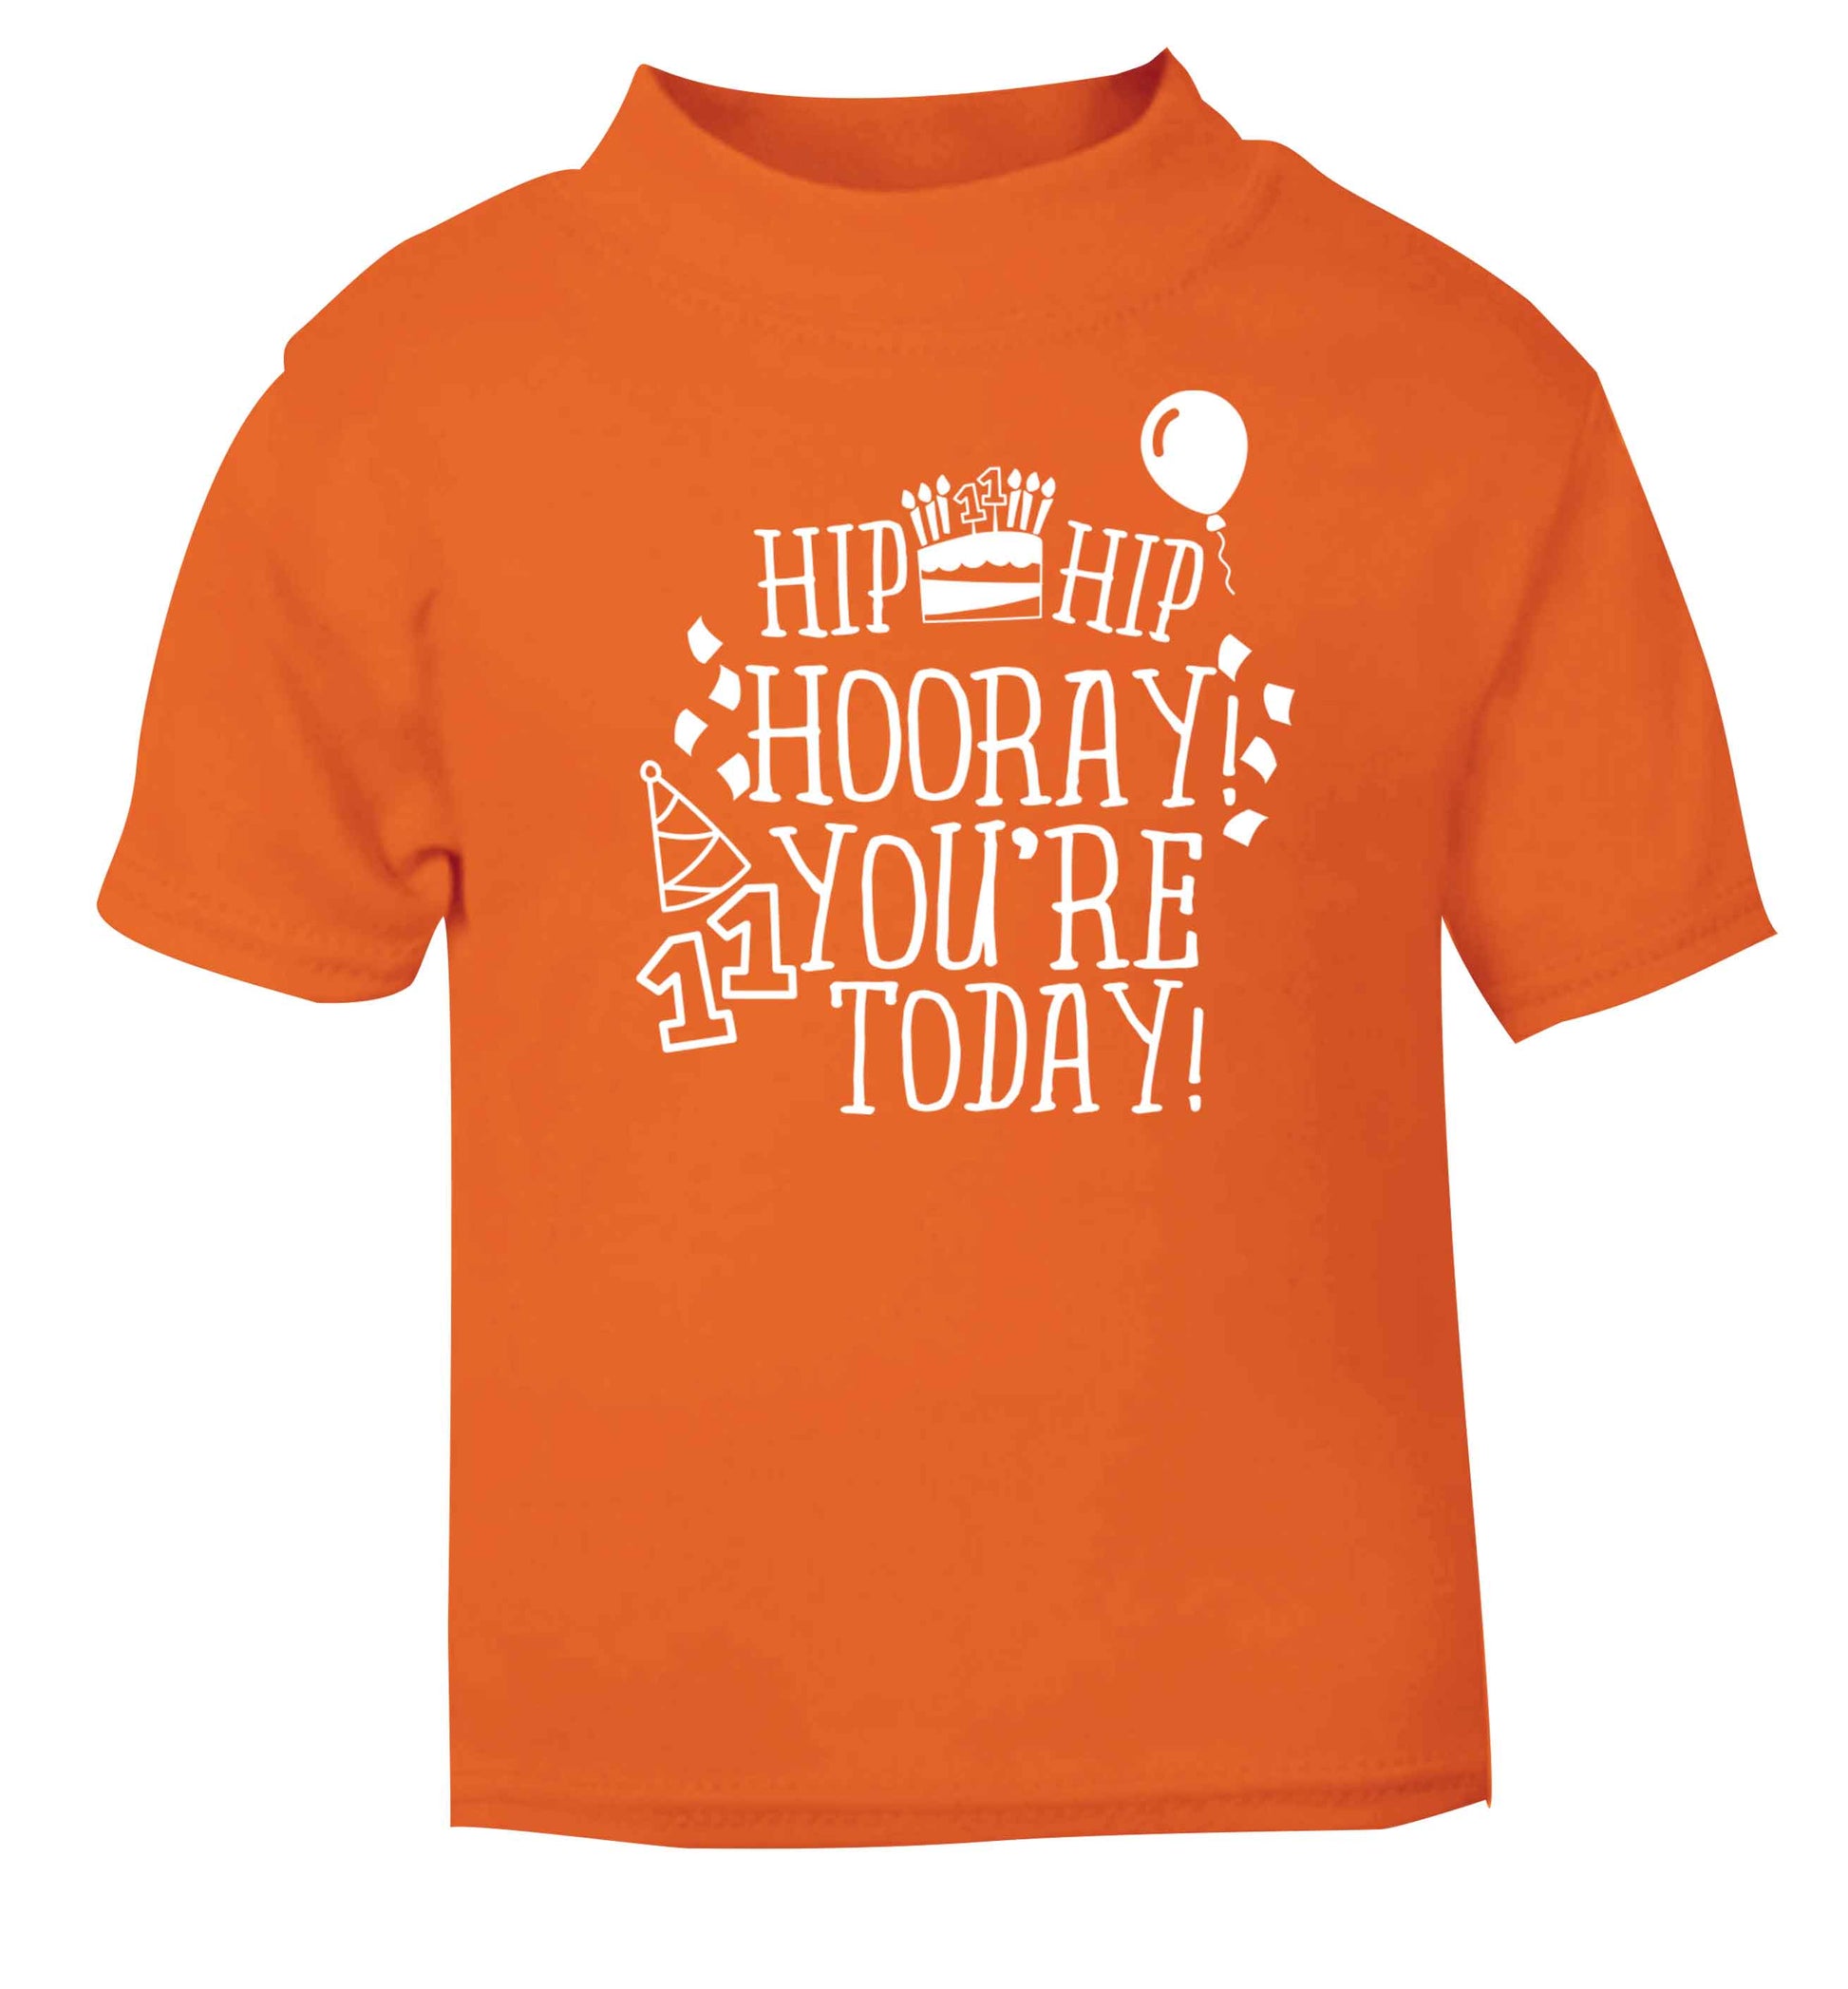 Hip hip hooray I you're eleven today! orange baby toddler Tshirt 2 Years